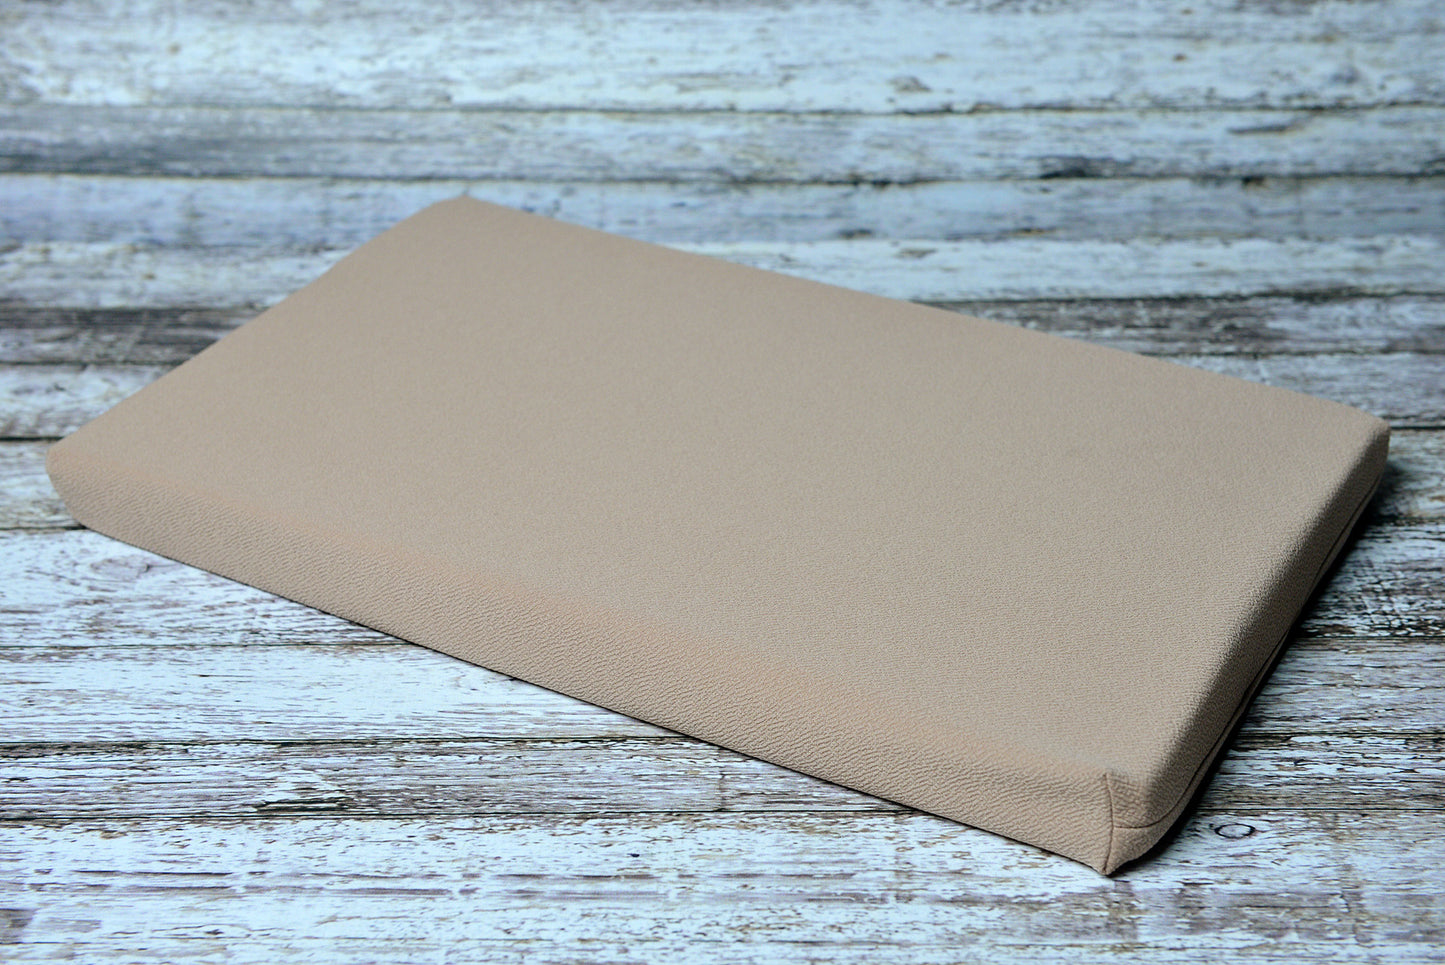 Mattress with Cover - Textured - Khaki-Newborn Photography Props